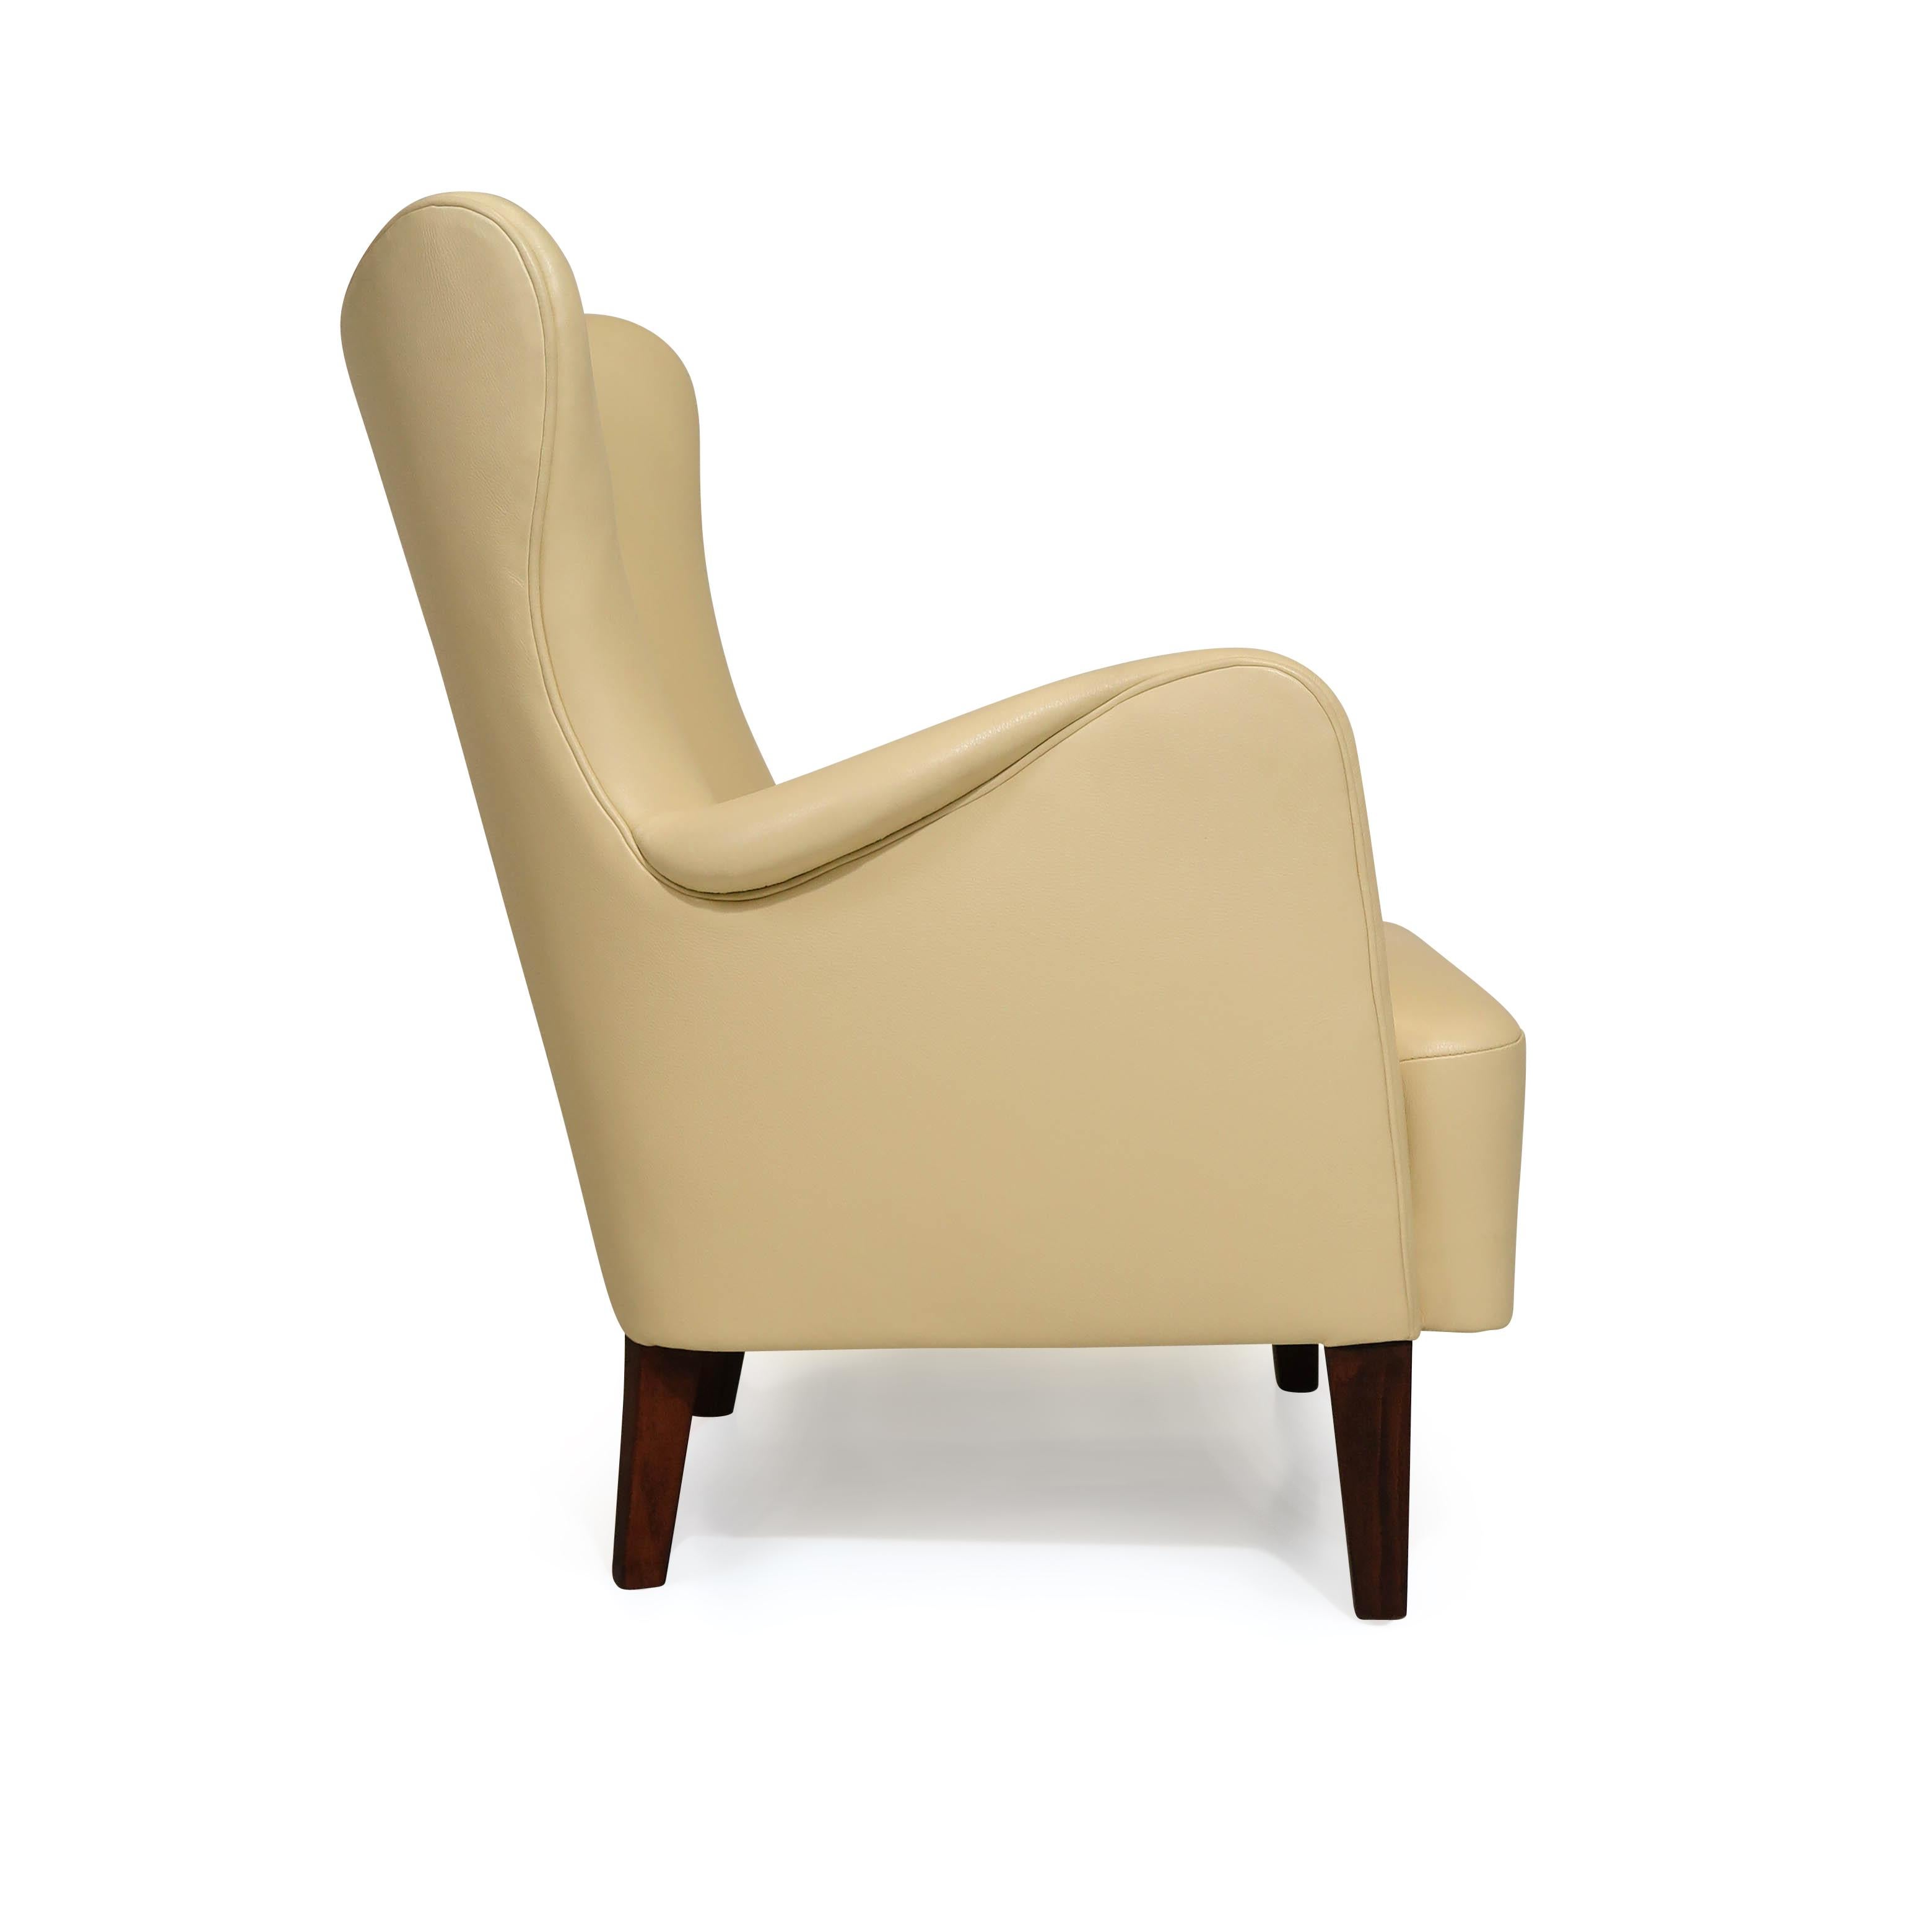 Scandinavian Modern Early Peter Hvidt Lounge Chair in Light Yellow Cream Leather